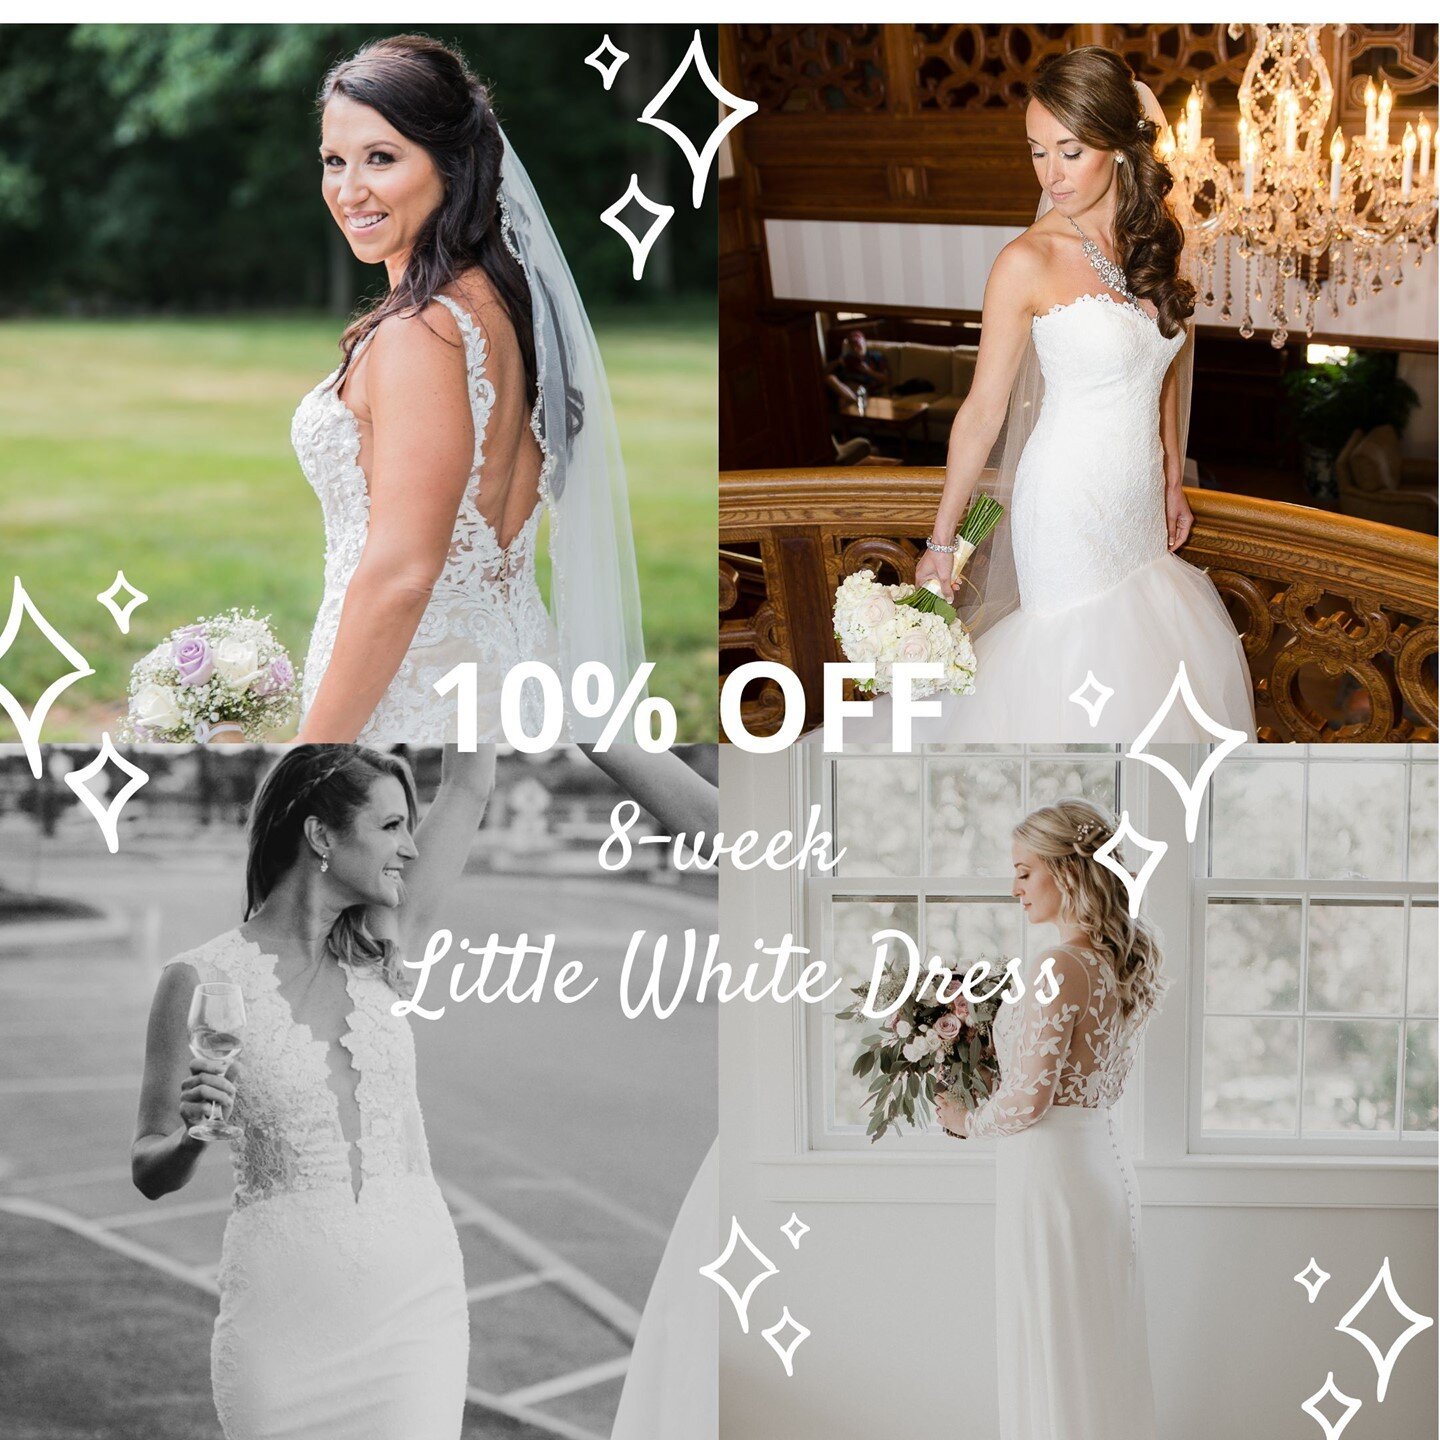 Covid restrictions are lifted...which means&hellip; WEDDING SEASON HAS BEGUN! HOORAY!❤⠀
⠀
To celebrate, we&rsquo;re slashing 10% off our 8-week &ldquo;Little White Dress&rdquo; online program to help all brides, maids, MOBs and MOGs get ready to rock